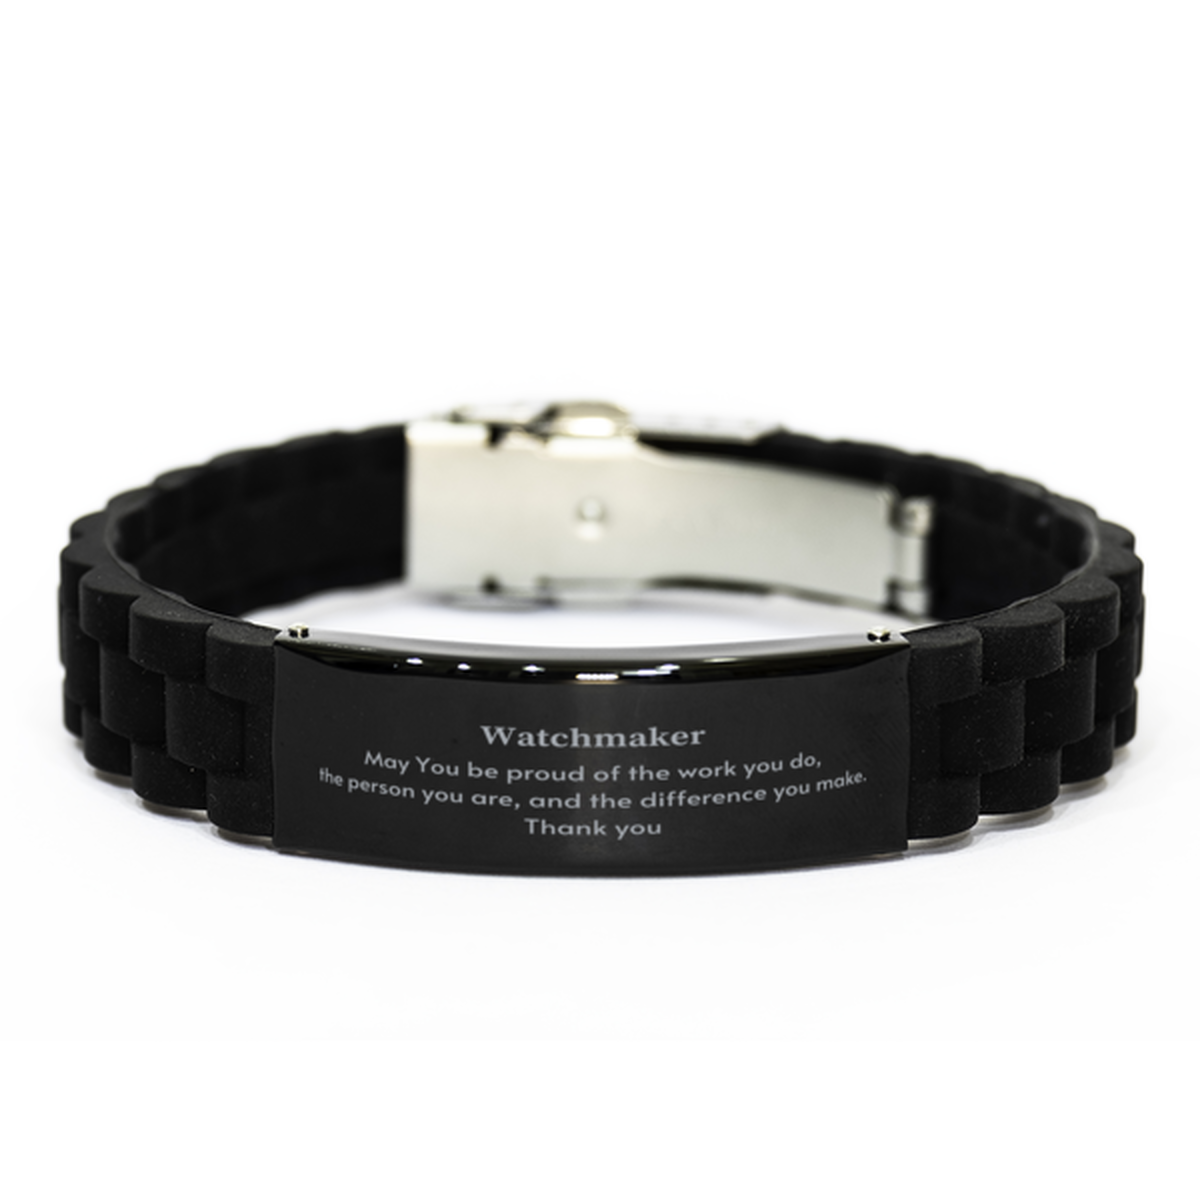 Heartwarming Black Glidelock Clasp Bracelet Retirement Coworkers Gifts for Watchmaker, Watchmaker May You be proud of the work you do, the person you are Gifts for Boss Men Women Friends